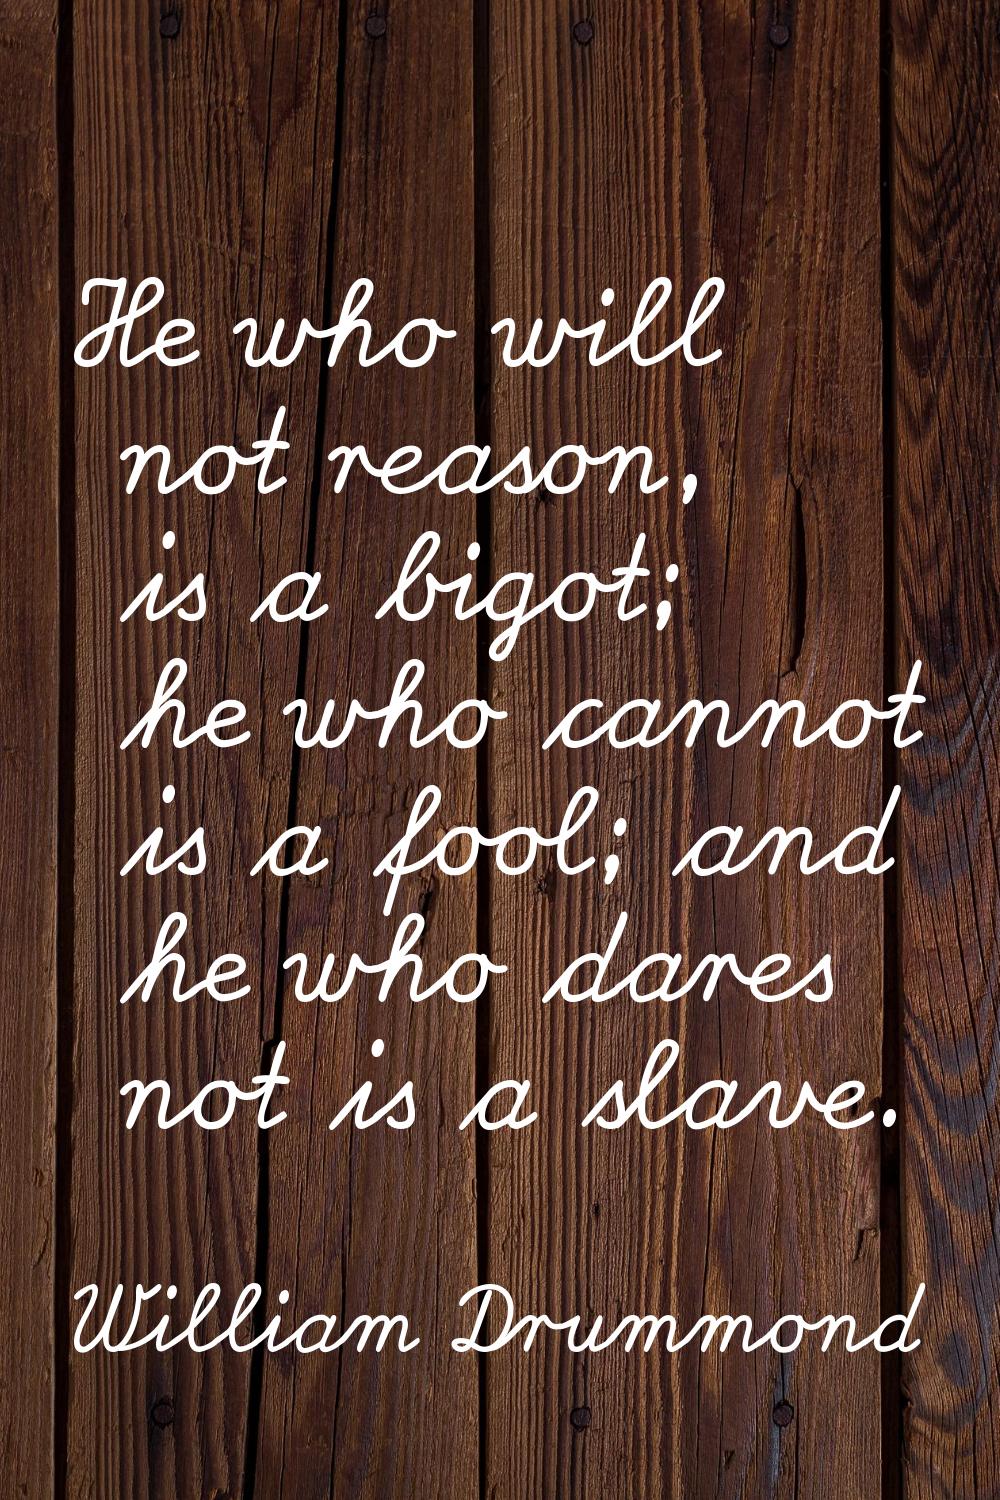 He who will not reason, is a bigot; he who cannot is a fool; and he who dares not is a slave.